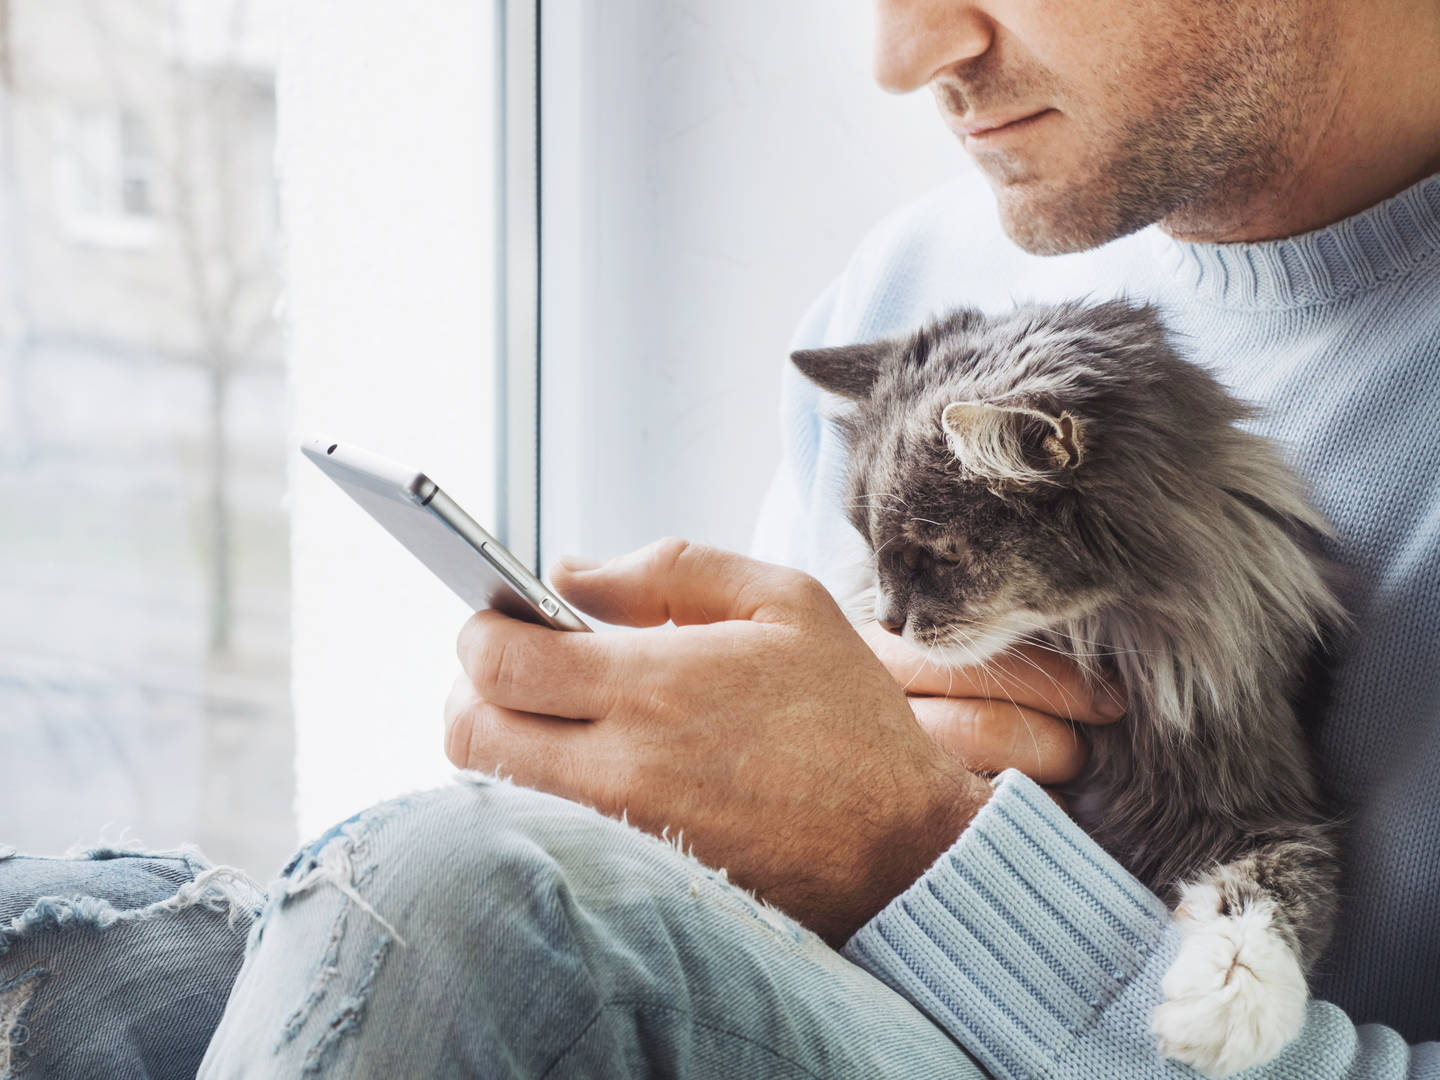 Man holds grey cat and looks at phone